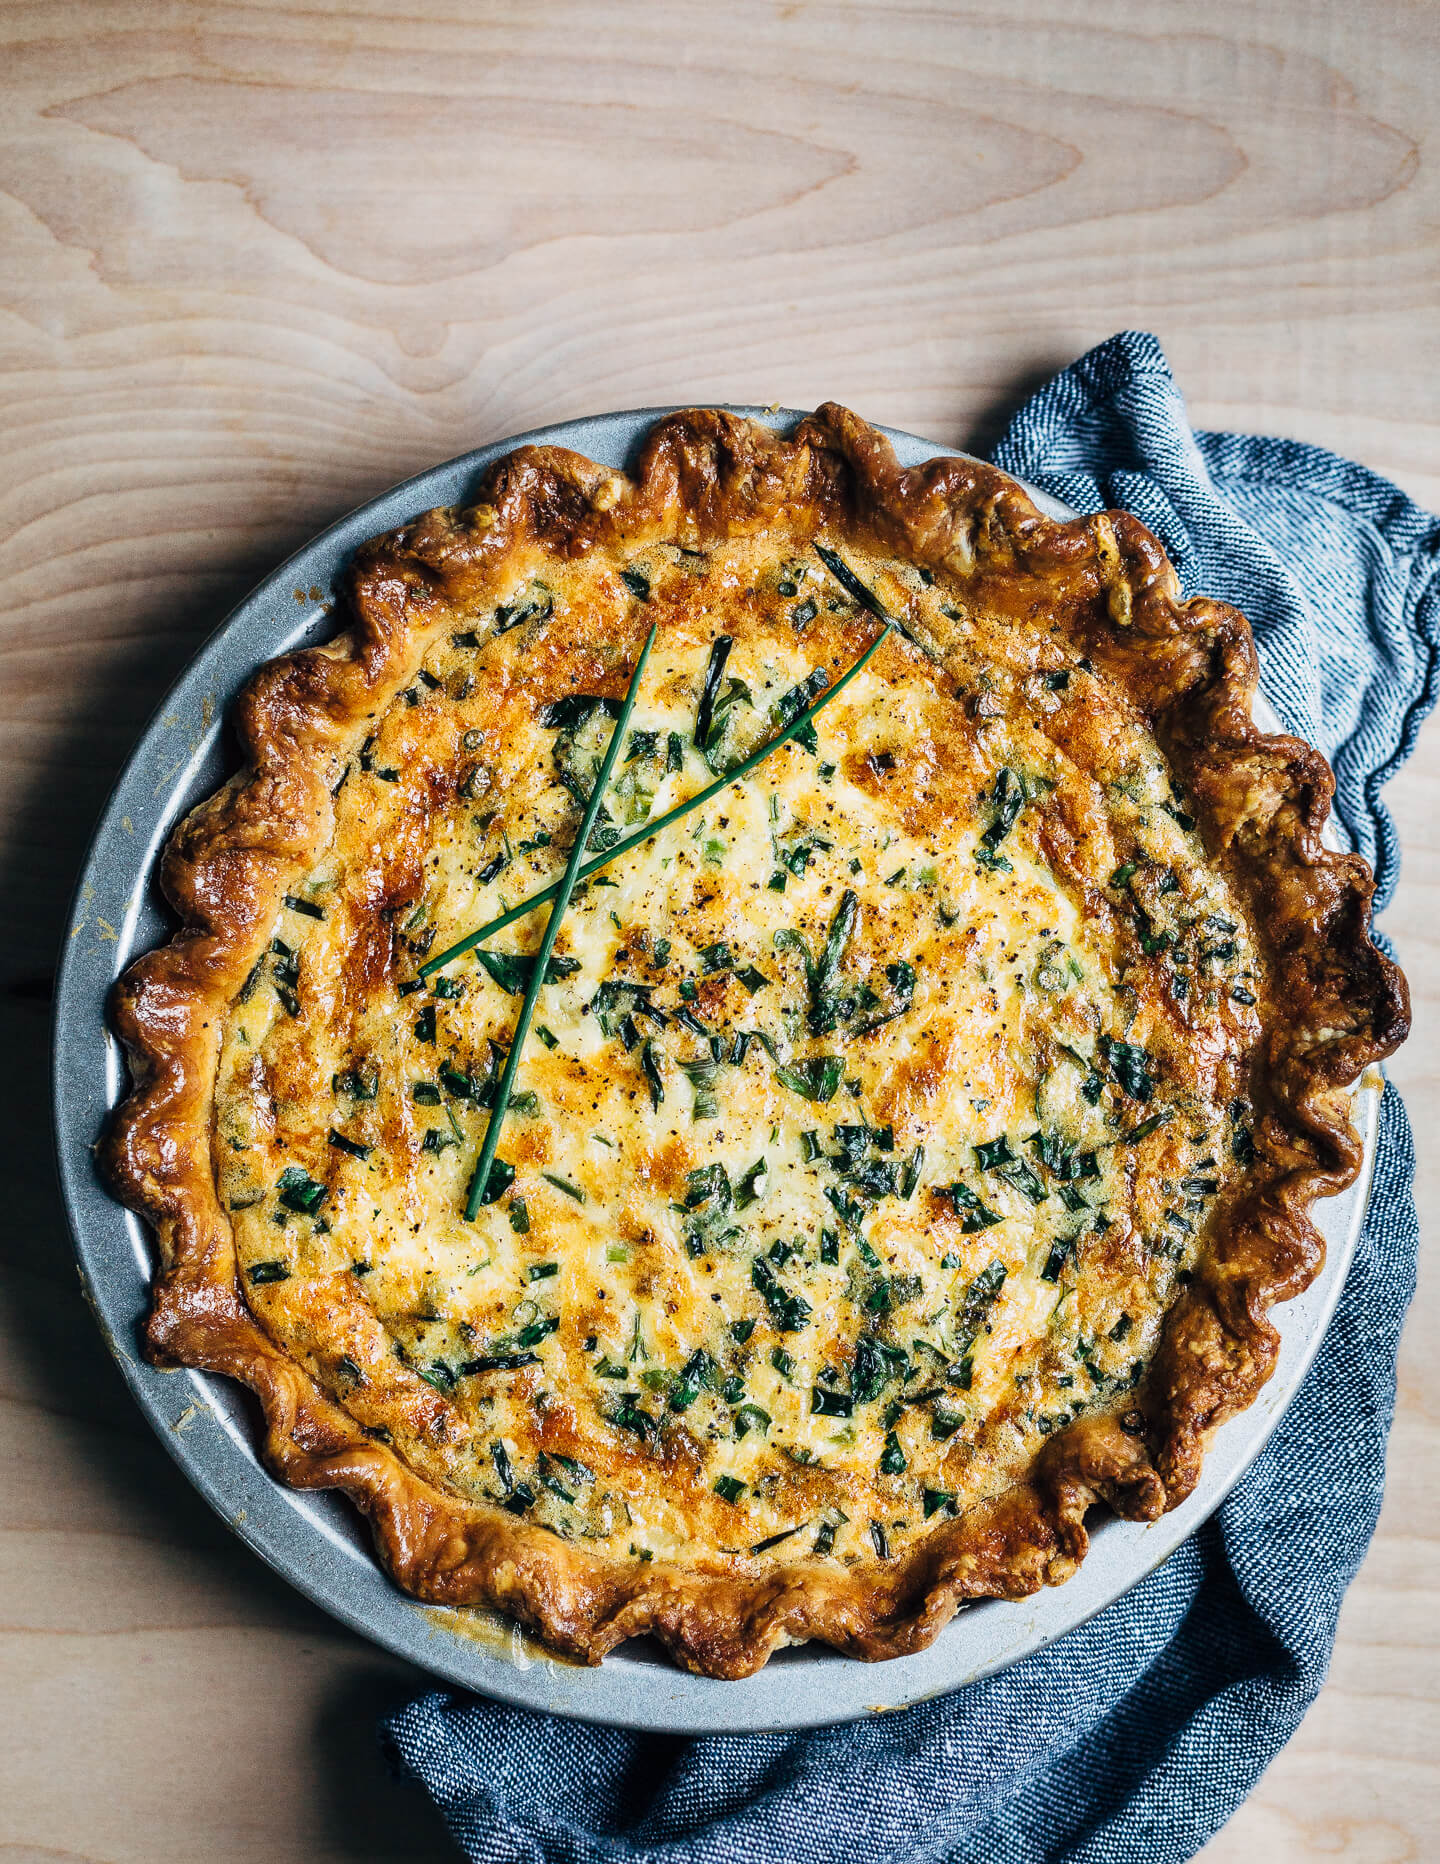 A simple chive and cheddar quiche recipe that makes the most out of refrigerator staples like eggs, cheddar, and butter. Yellow onions caramelized in butter and whatever fresh herbs you can find lend flavor and contrast to this wonderfully rich vegetarian quiche. 